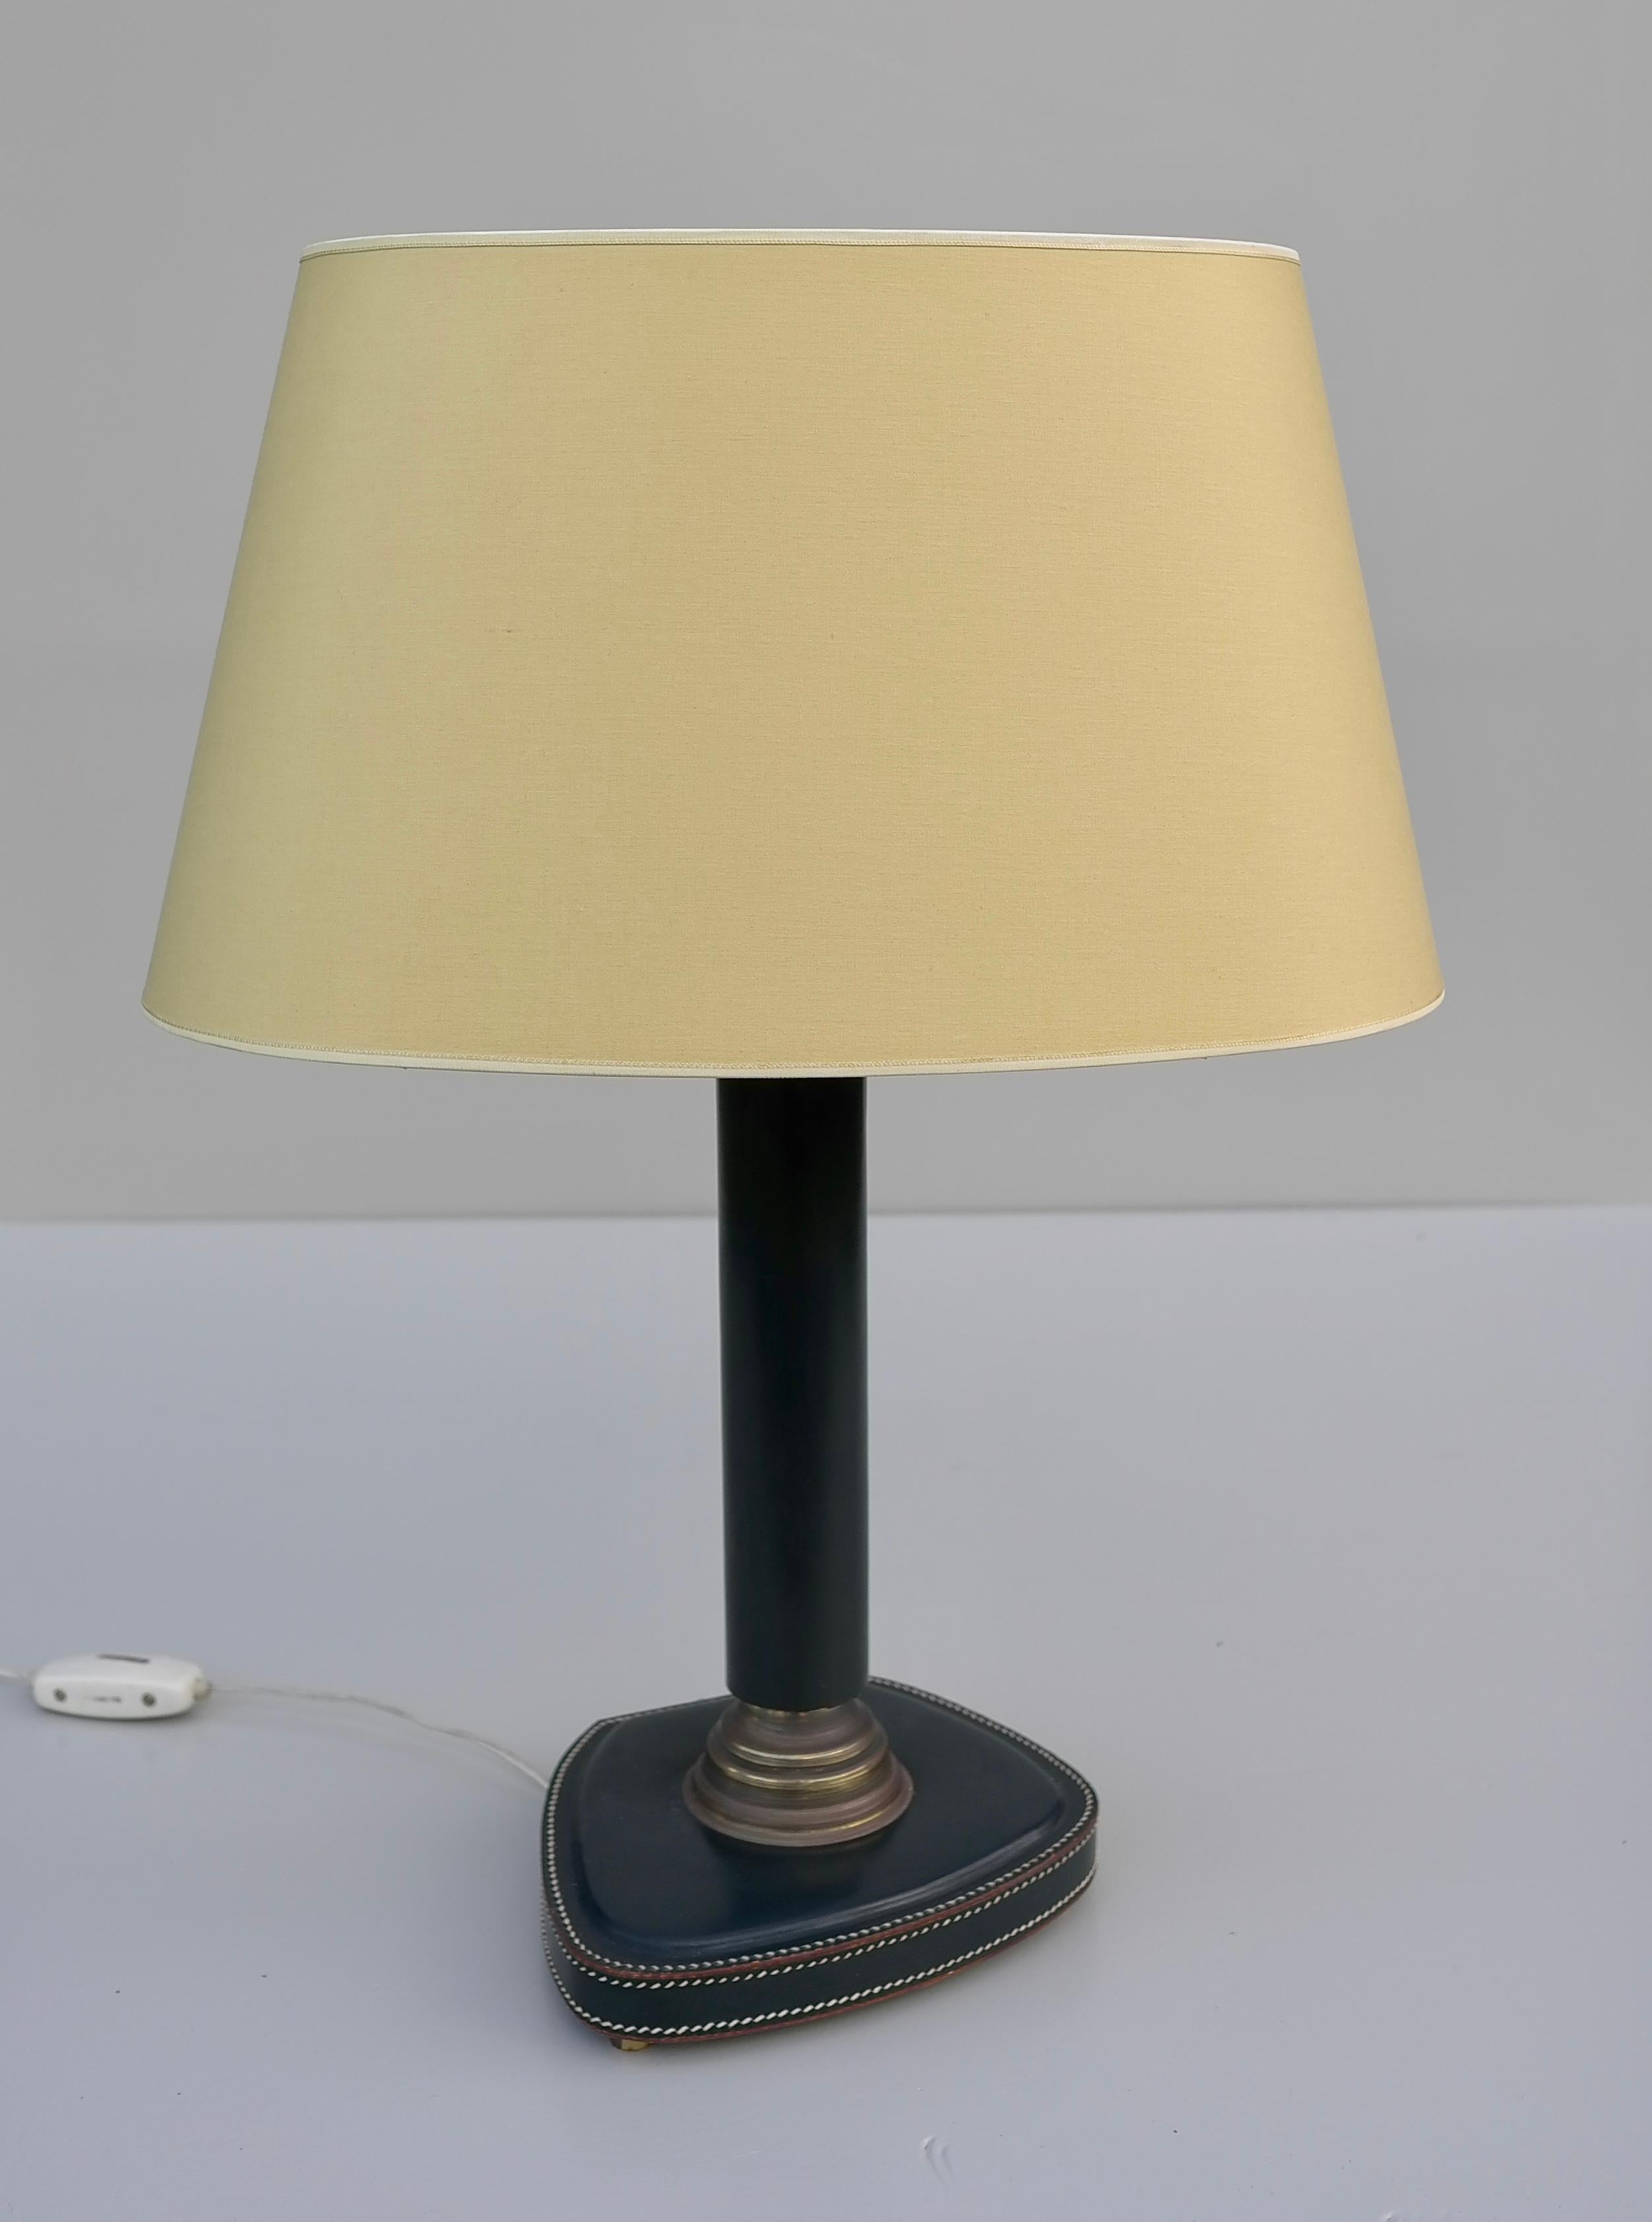 Hand-stitched Green leather table lamp, France, 1960s.